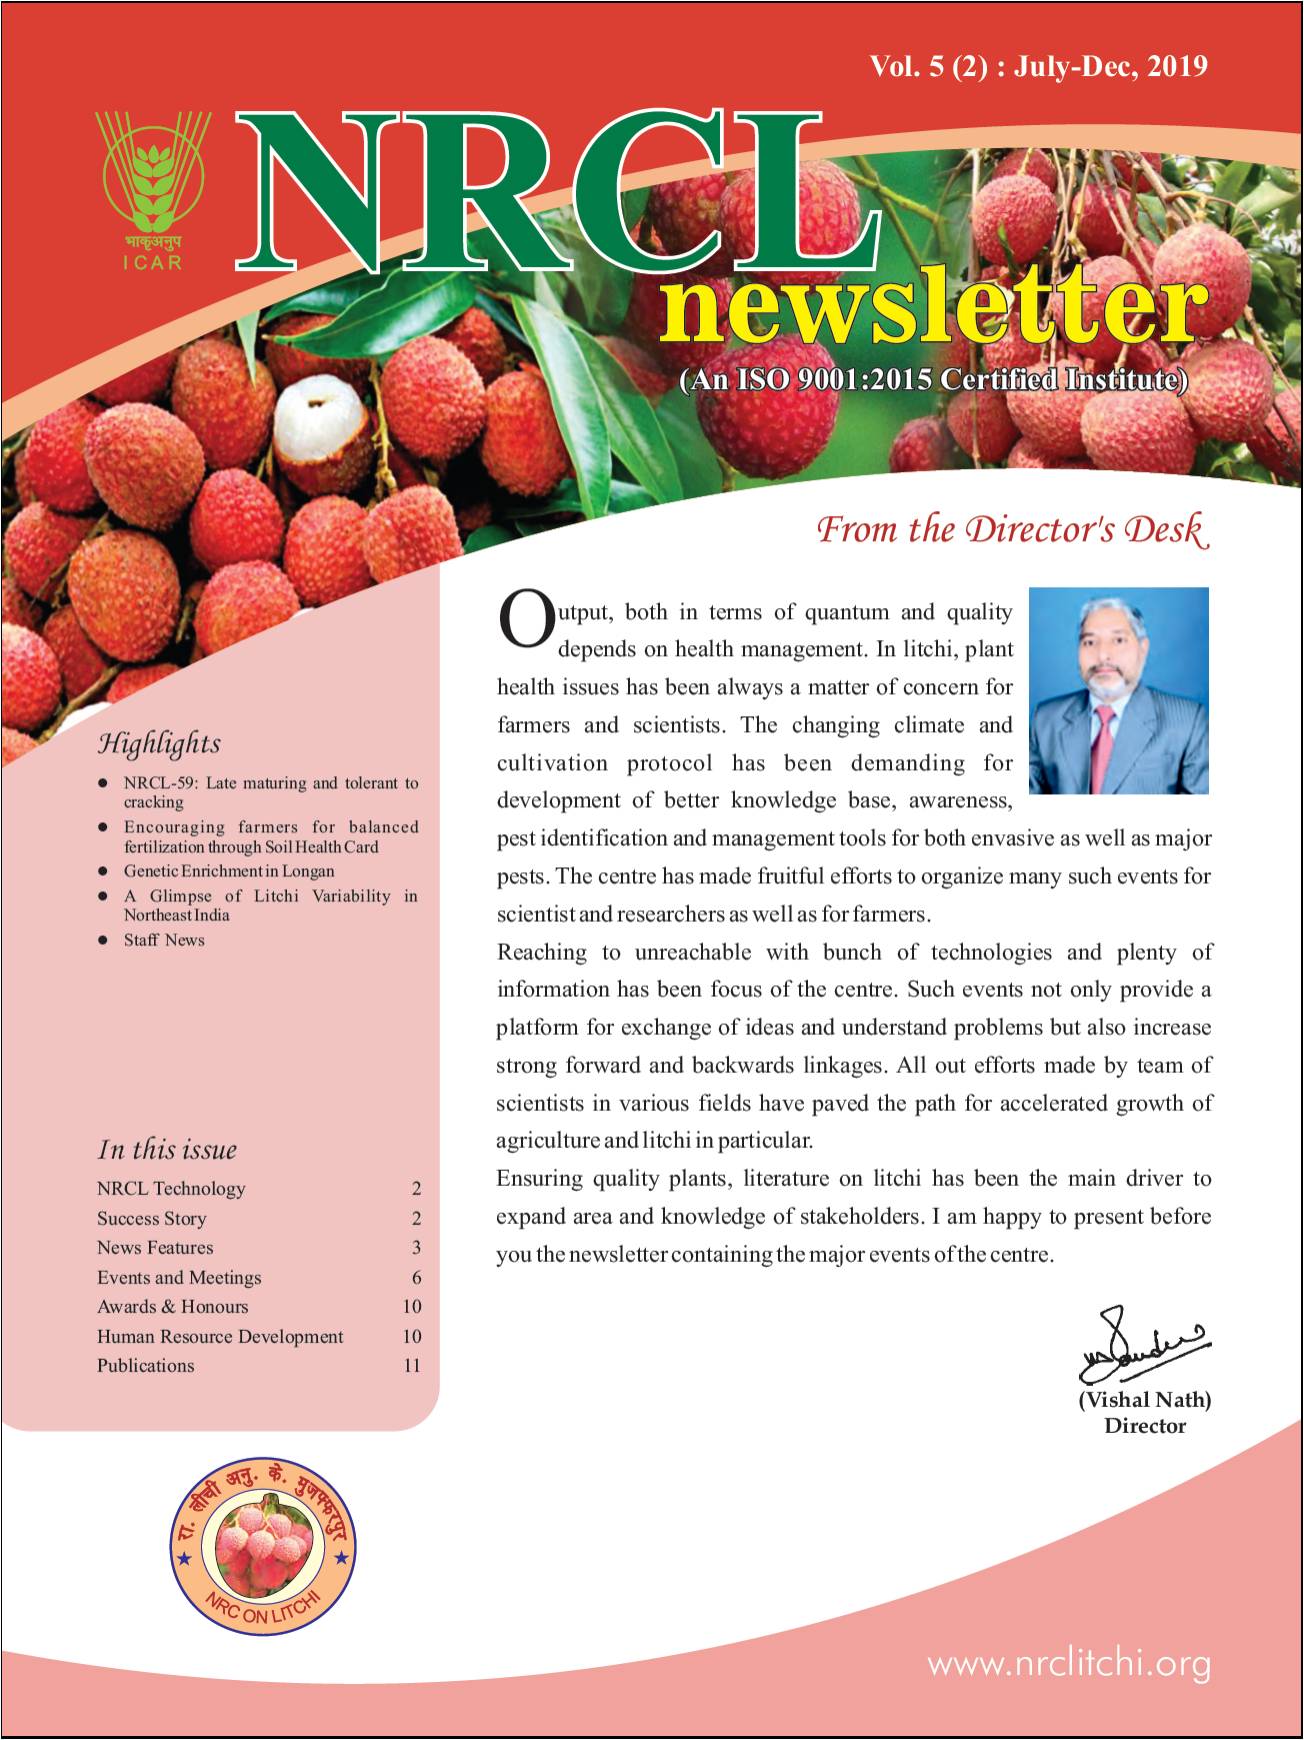 Cover photo of NRCL - Newsletter Vol. 4 (2) July - Dec, 2018